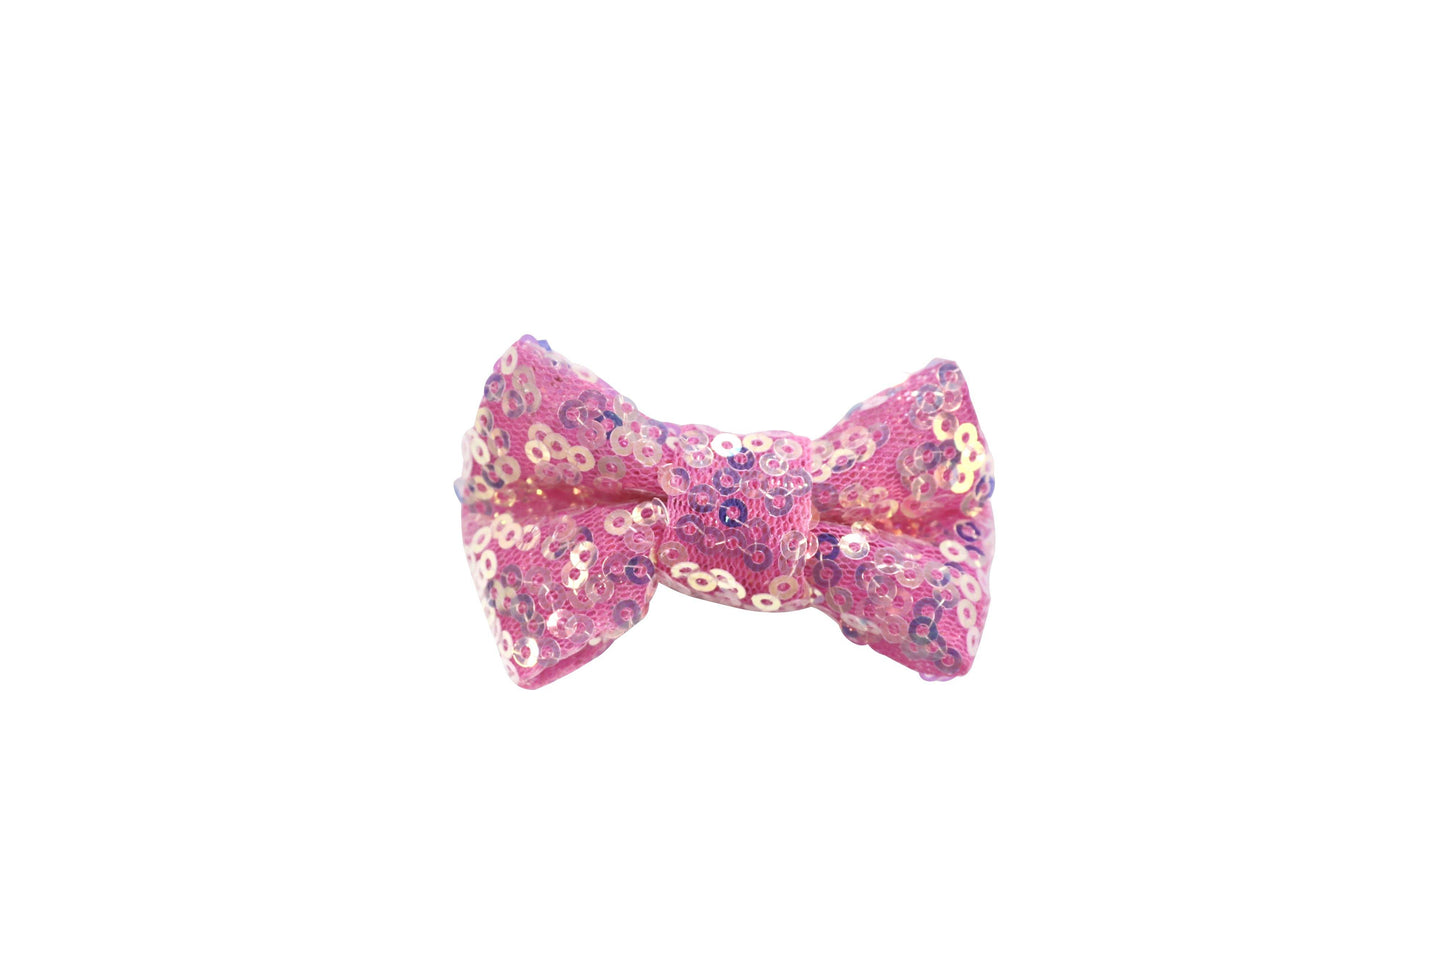 2" IRIDESCENT Small Sequin Bow - Pretty in Pink Supply